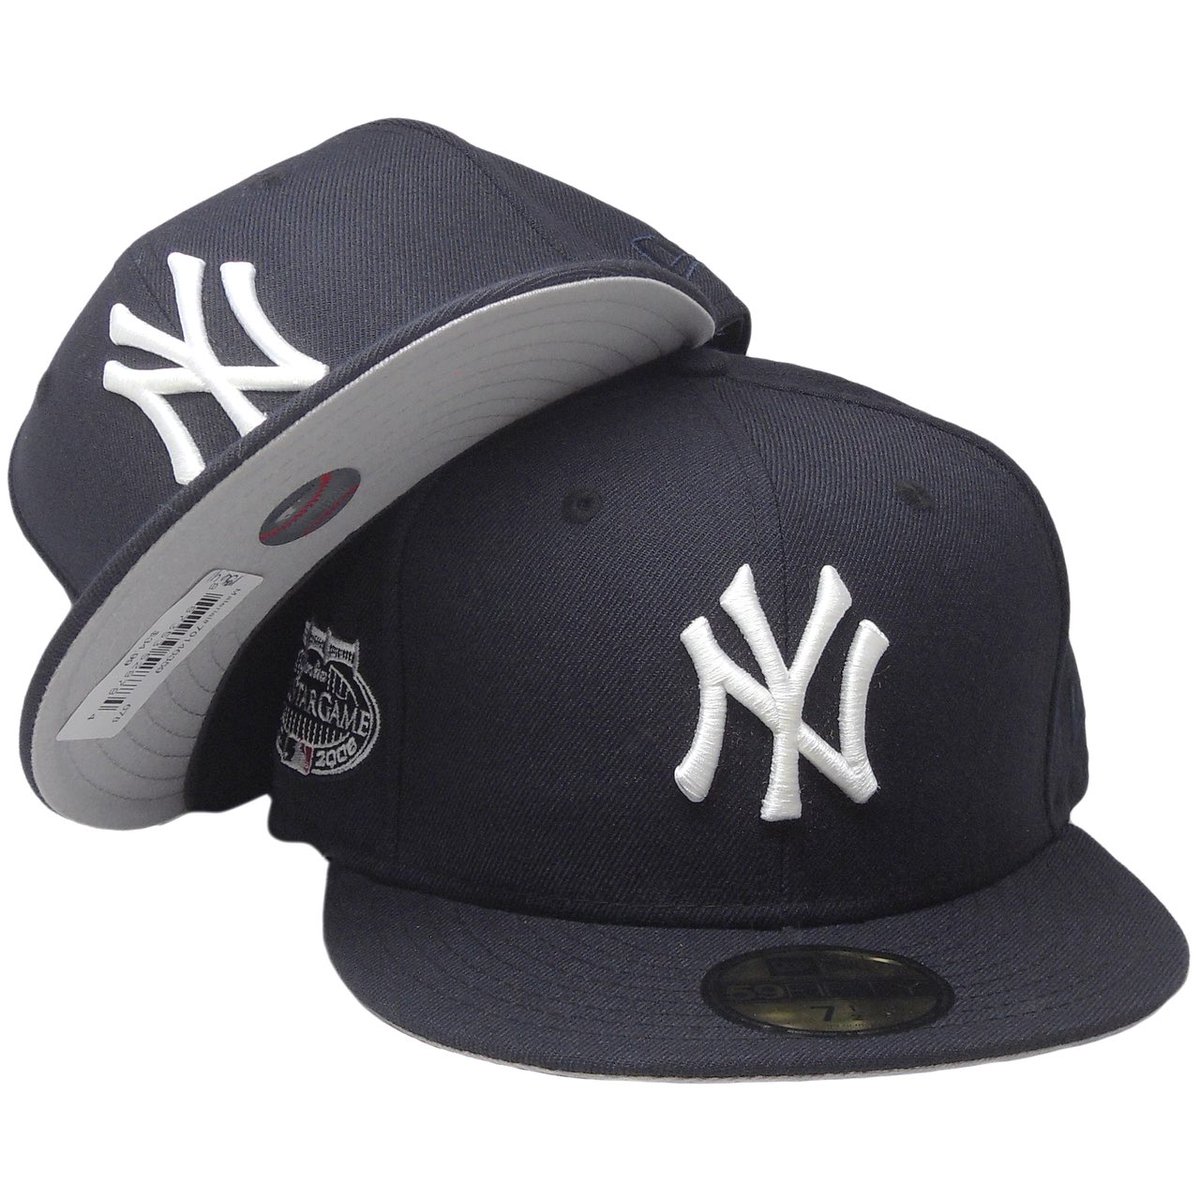 NY Yankees-i mean do I even have to say much?-reported that sales of this hat was most purchased by South Central natives -never say that word "rollin" in public without a .38-dont wear this hat just because you a Nipsey fan